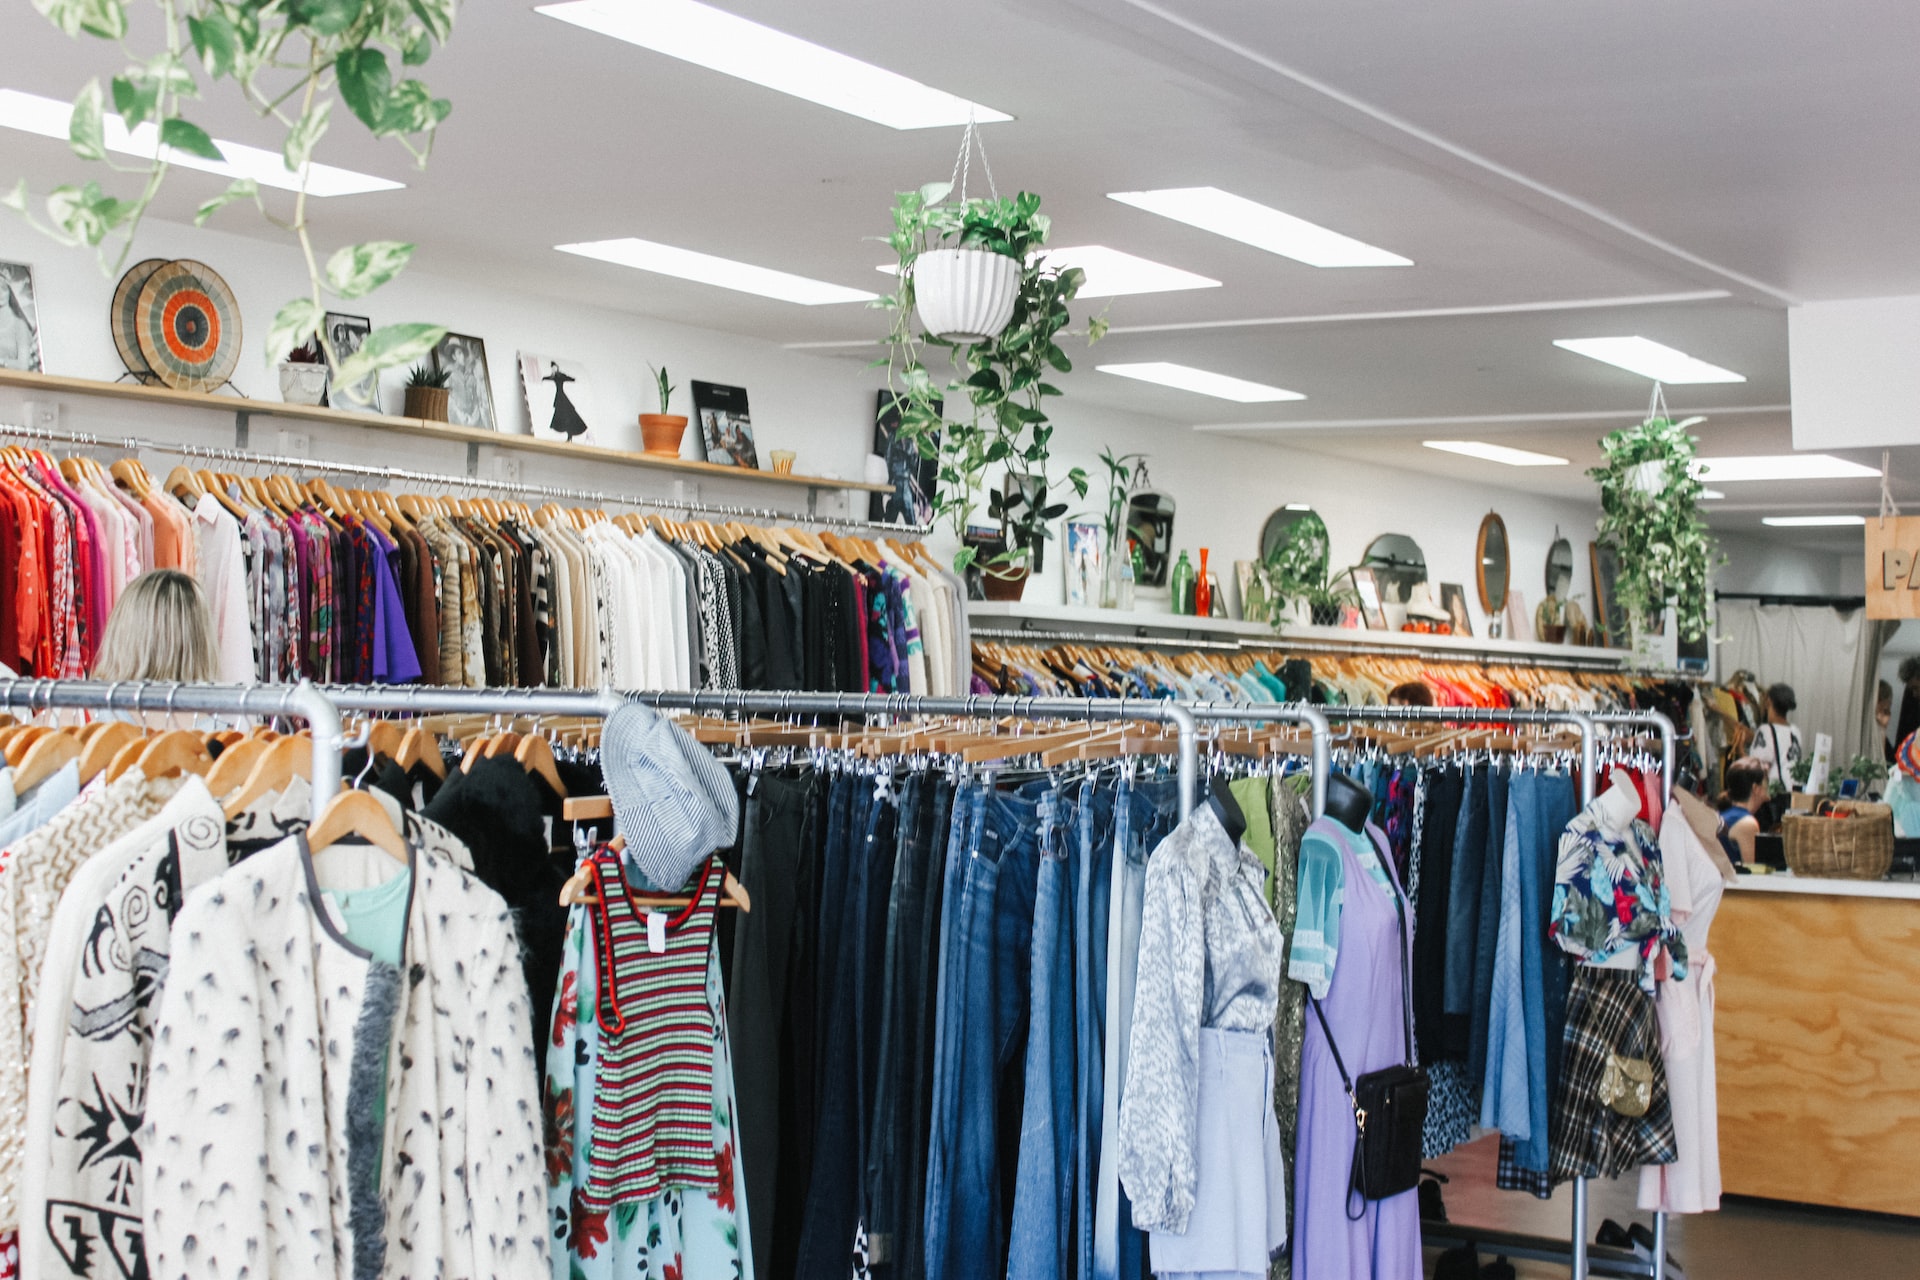 A thrift store with lots of clothing racks and plants hanging throughout the store.